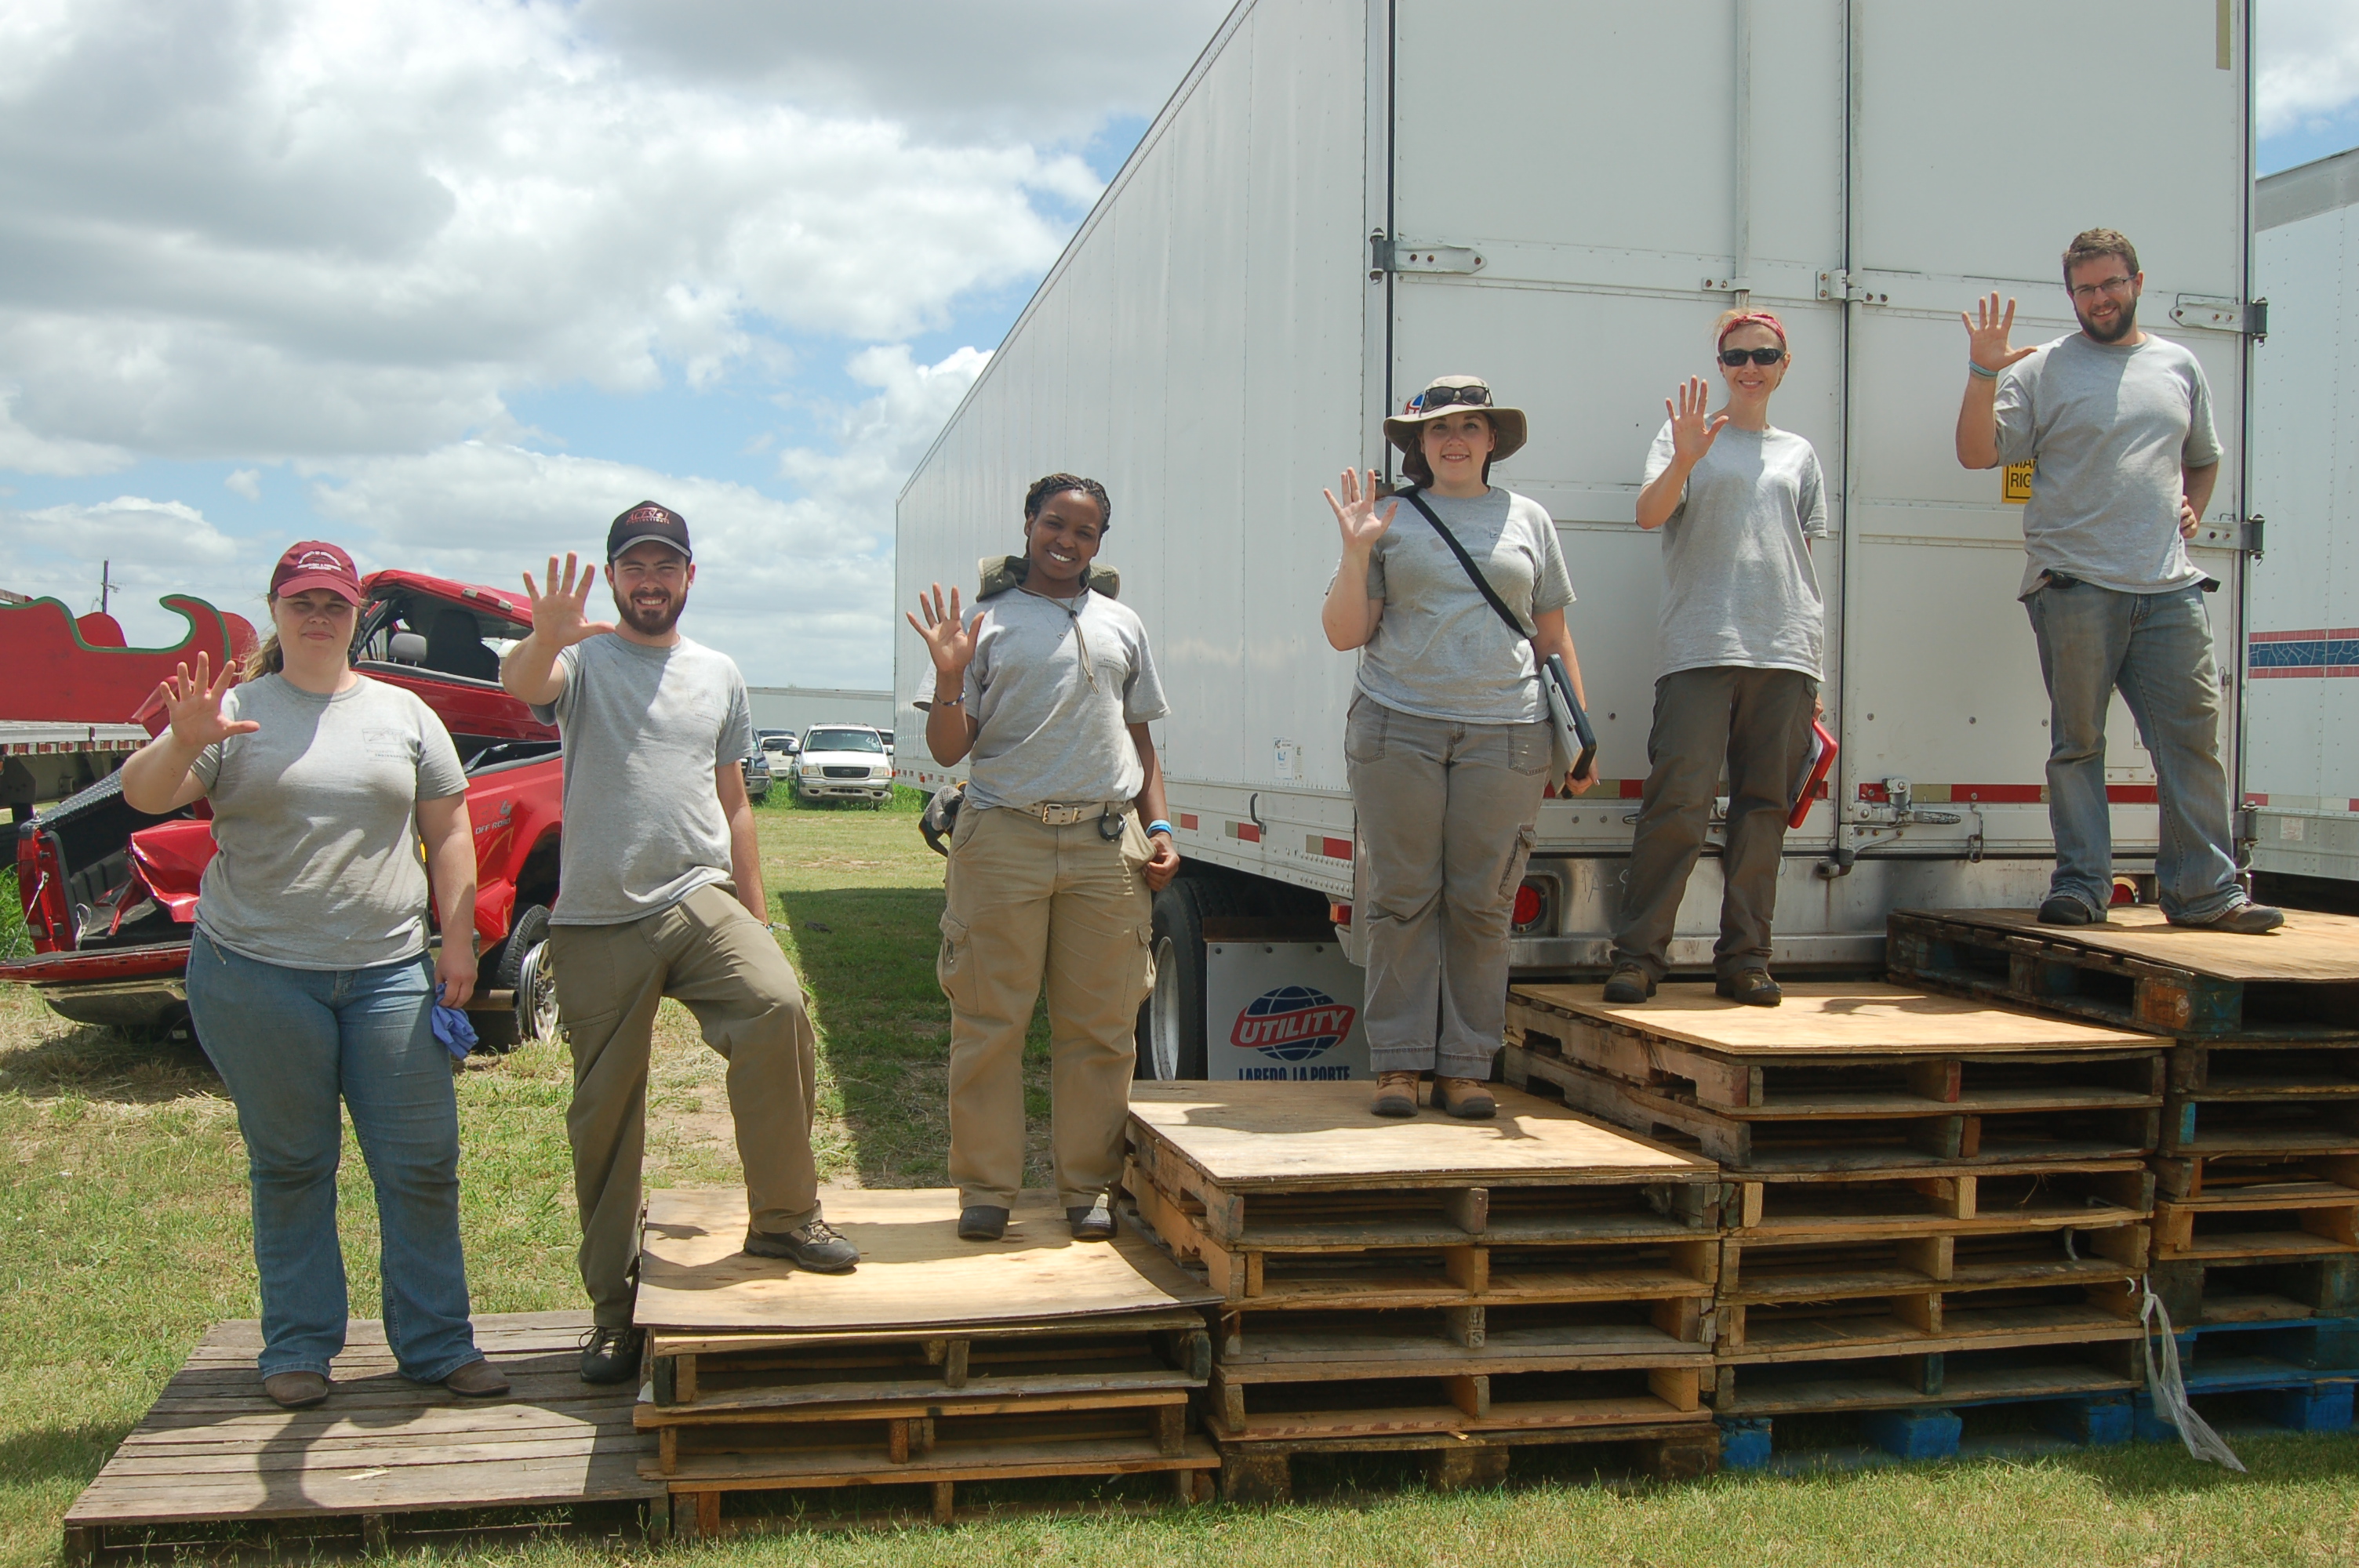 UIndy team holding up 5 fingers for day 5 while standing on increasing amounts of wooden palettes